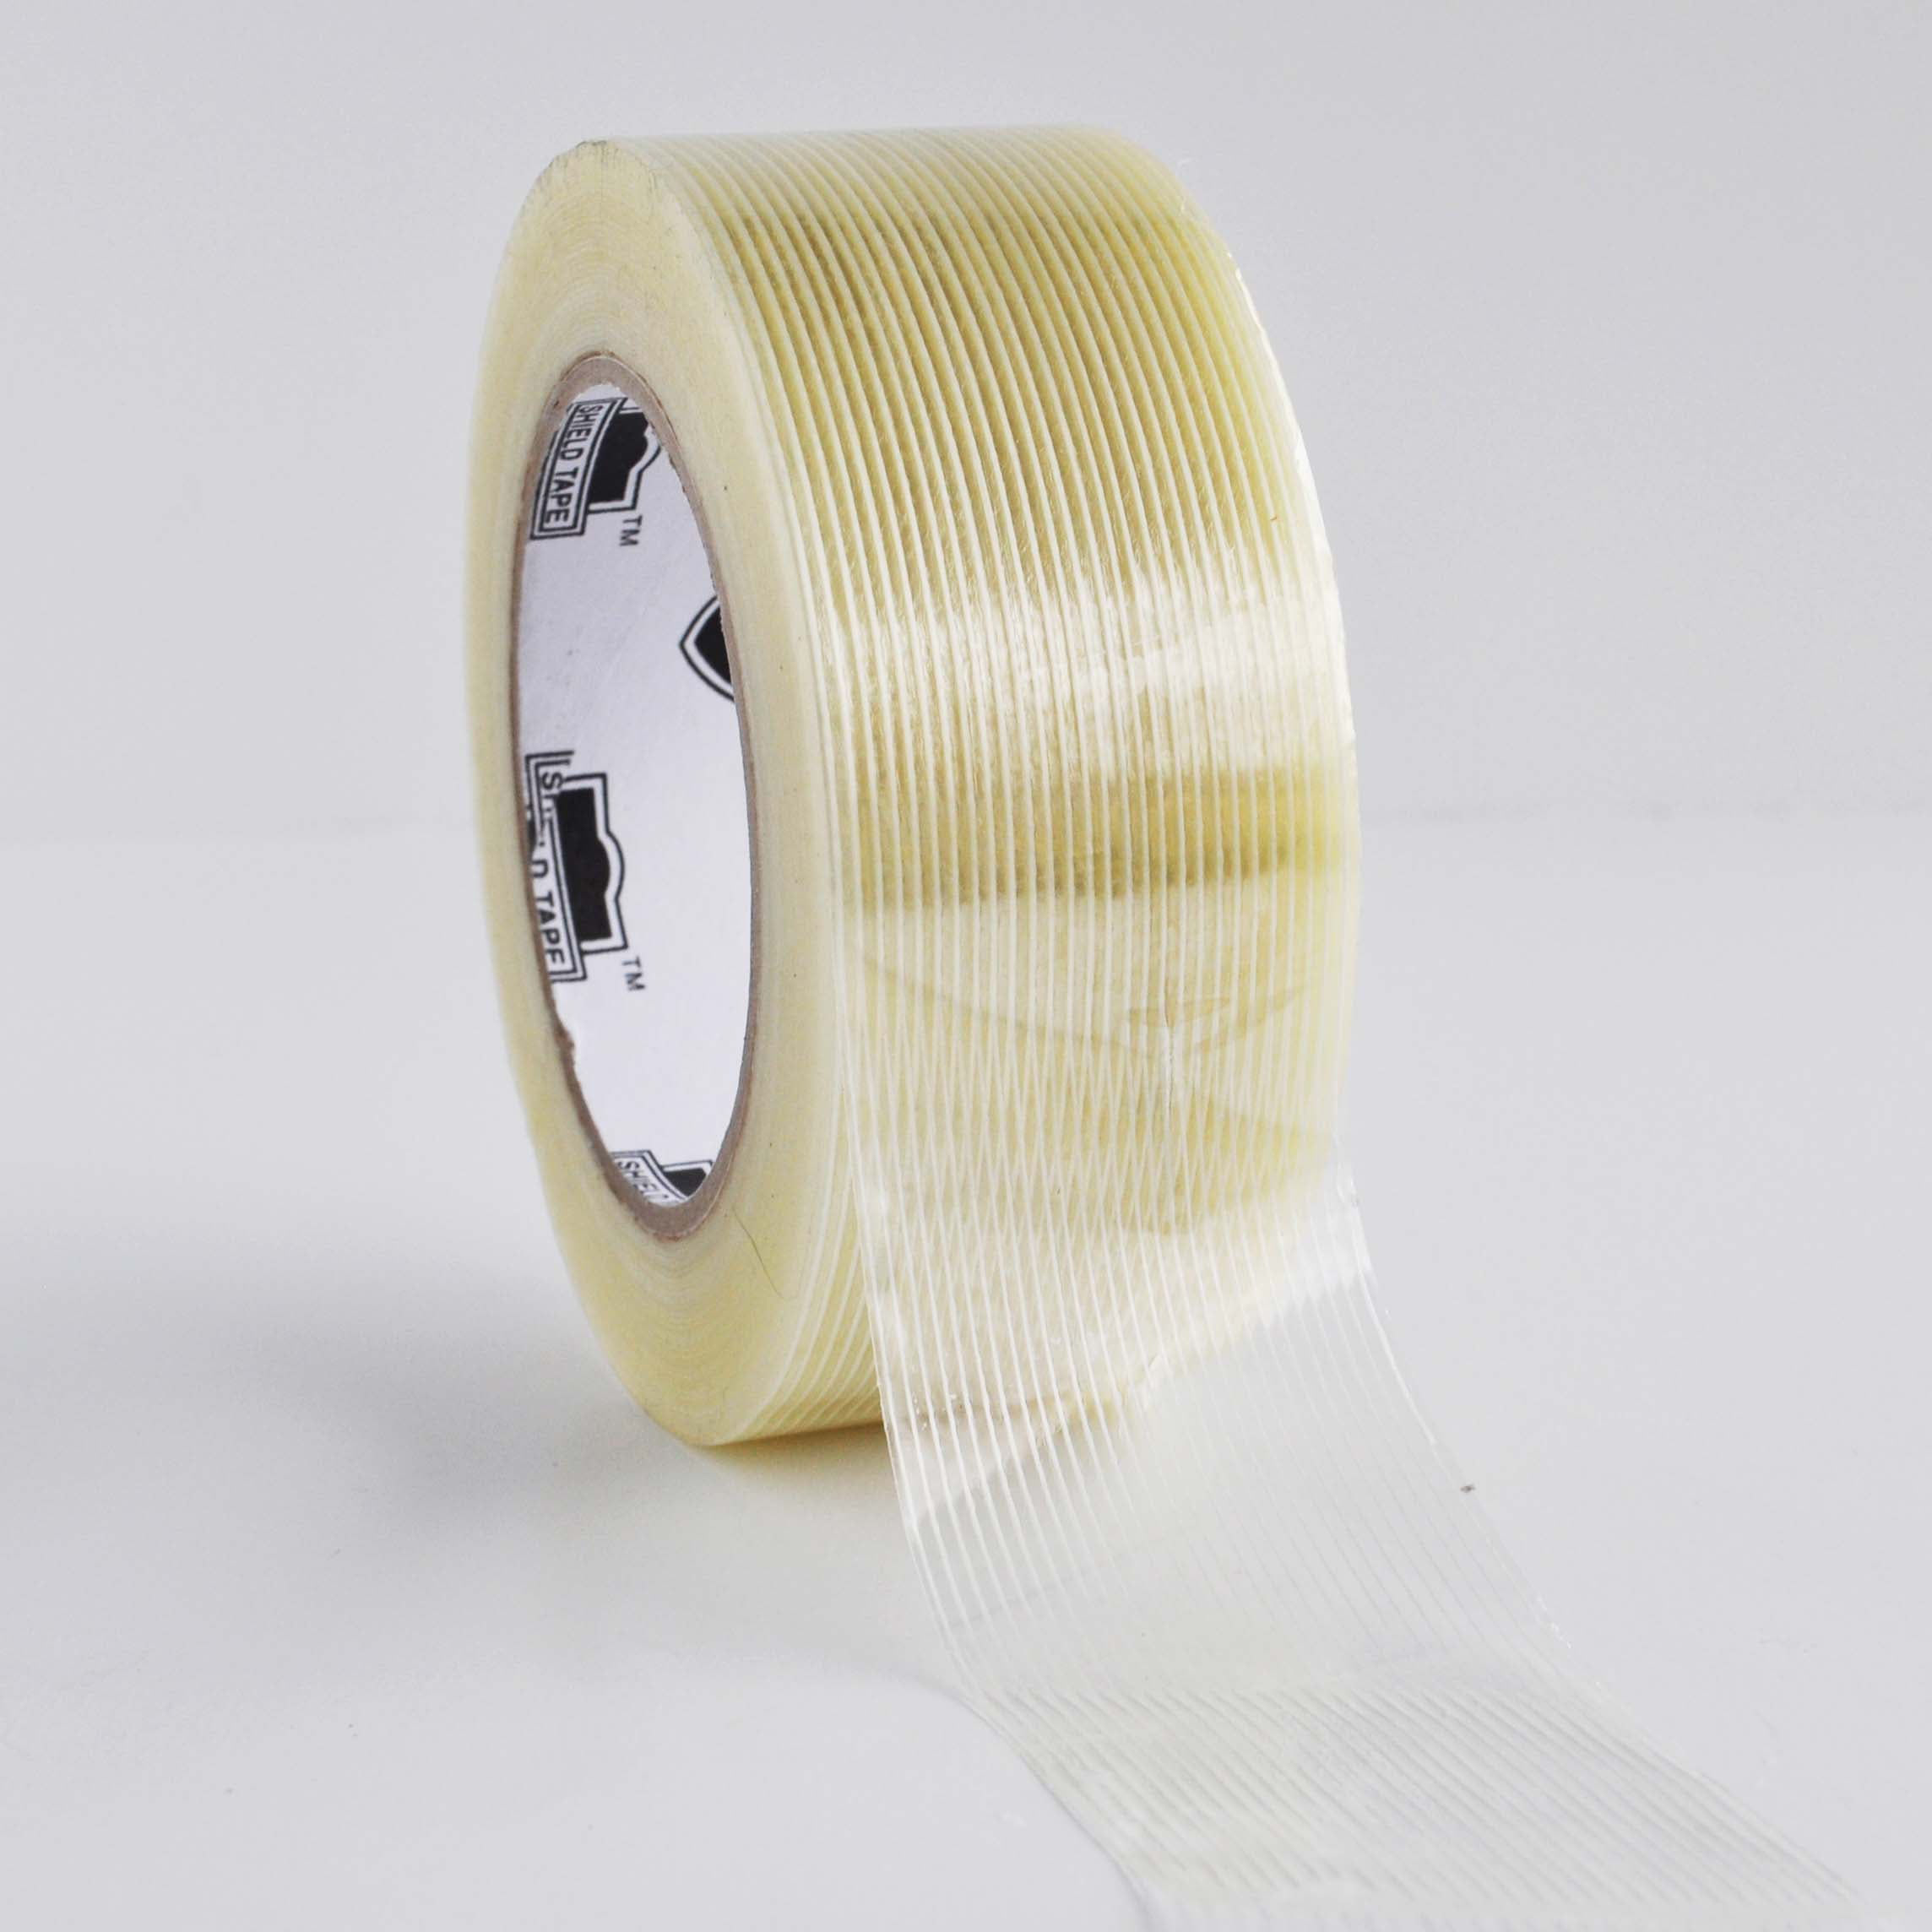 EXTRA STRONG 1" Fiberglass Reinforced Strapping Filament Tape 60 yds 36 ROLLS 